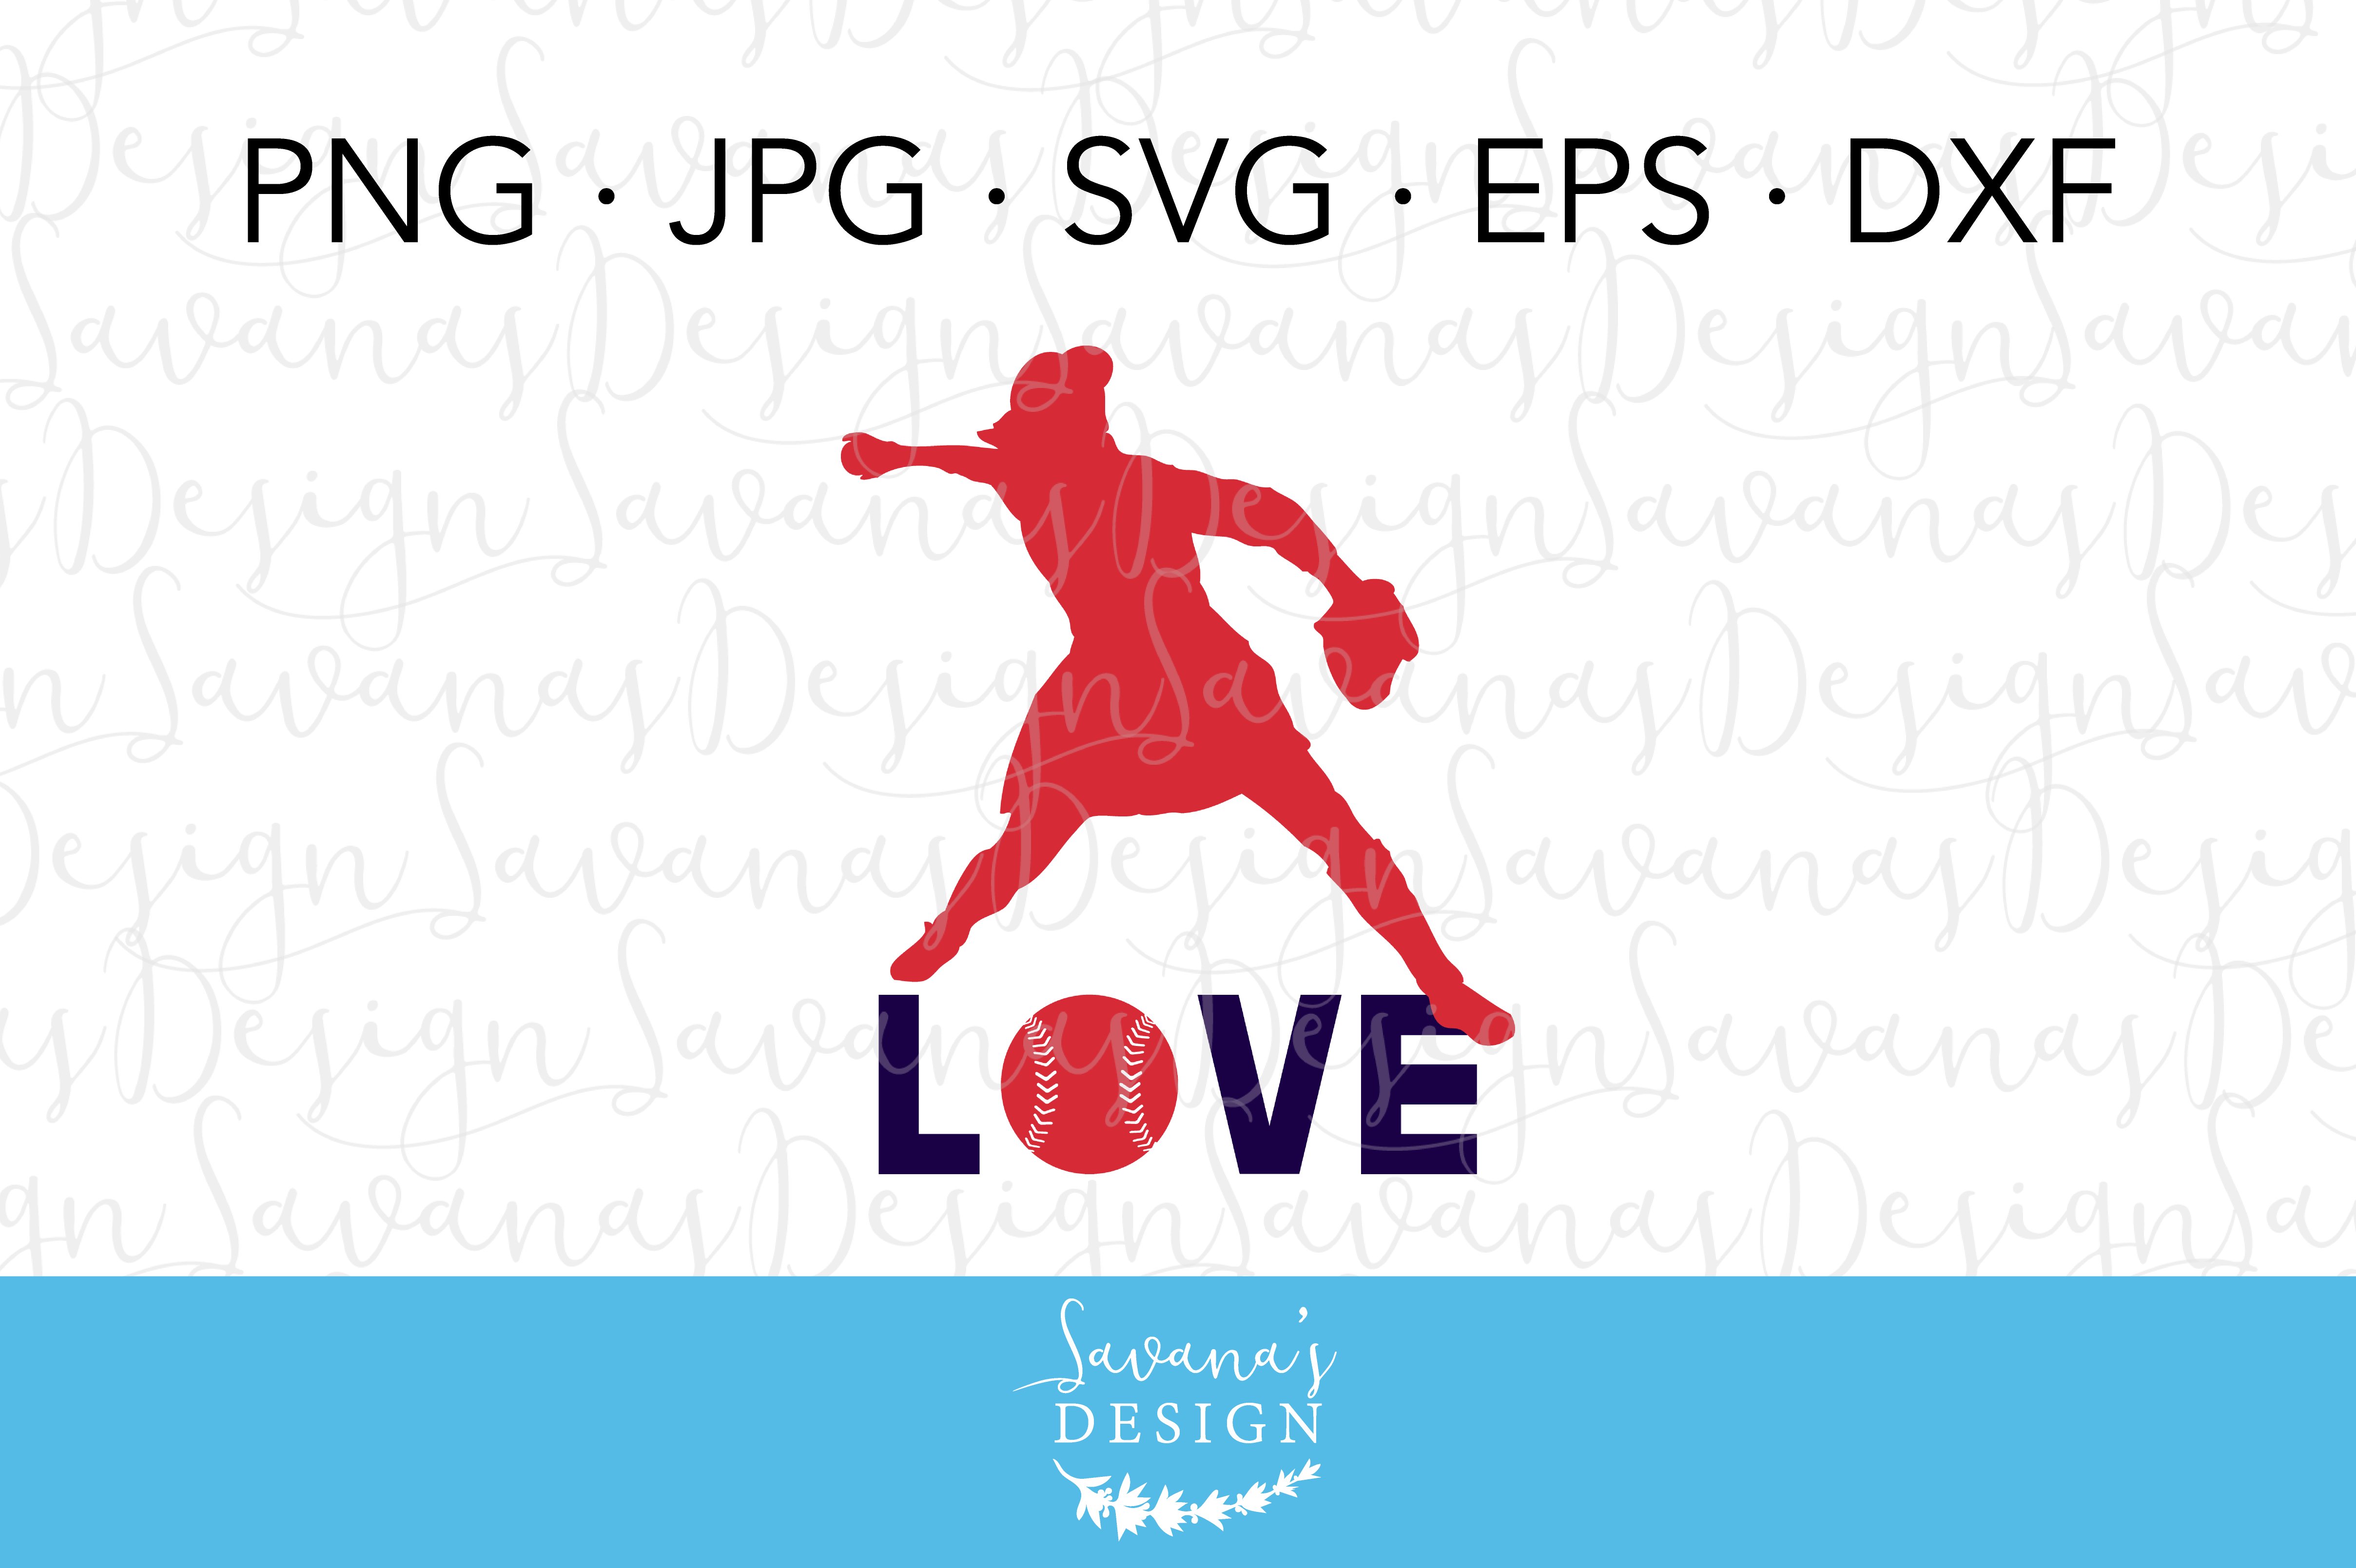 Softball Player SVG Cut File cover image.